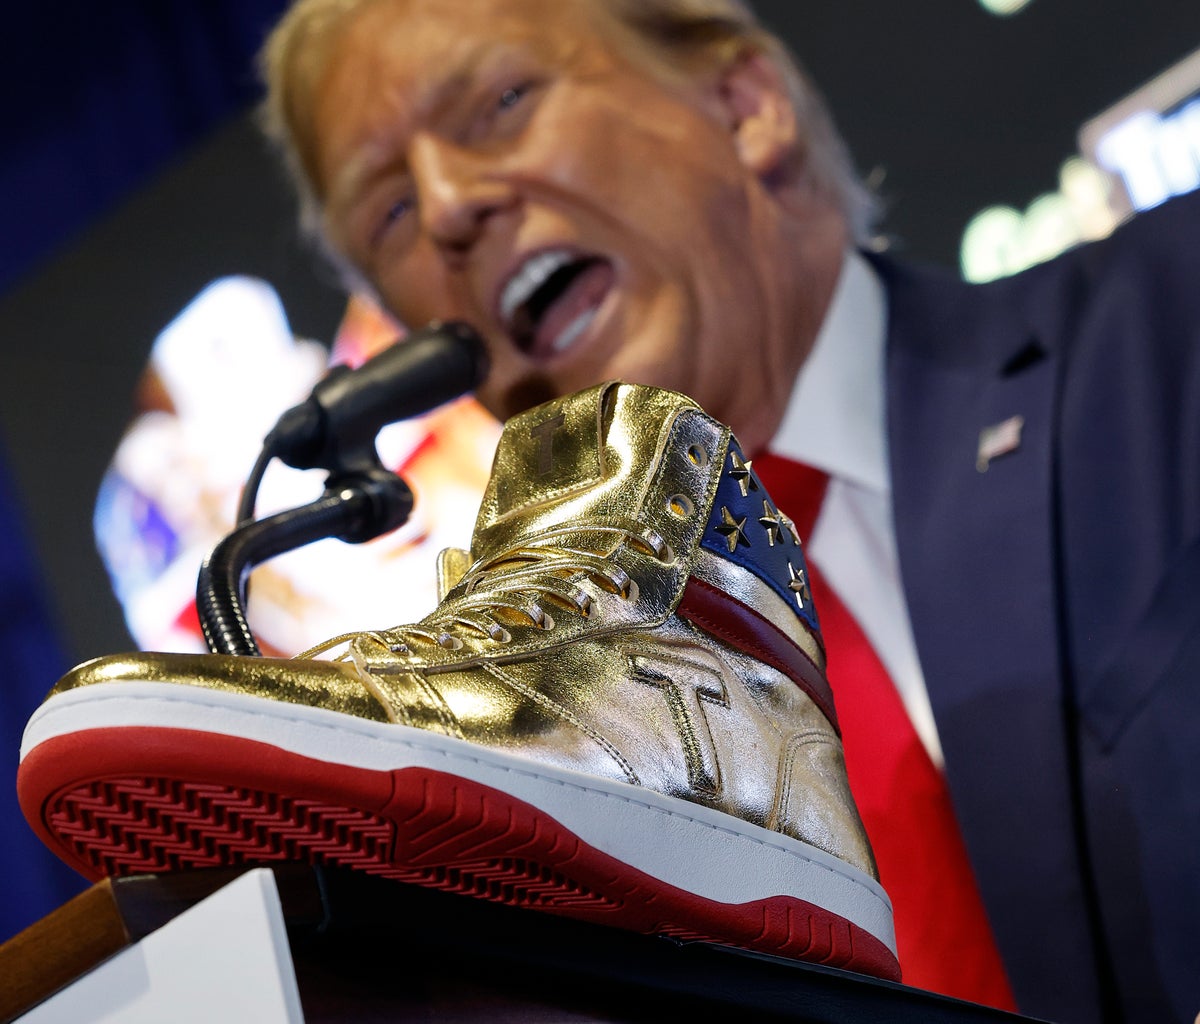 Trump booed as he launches $399 sneaker the day after $350m fraud fine